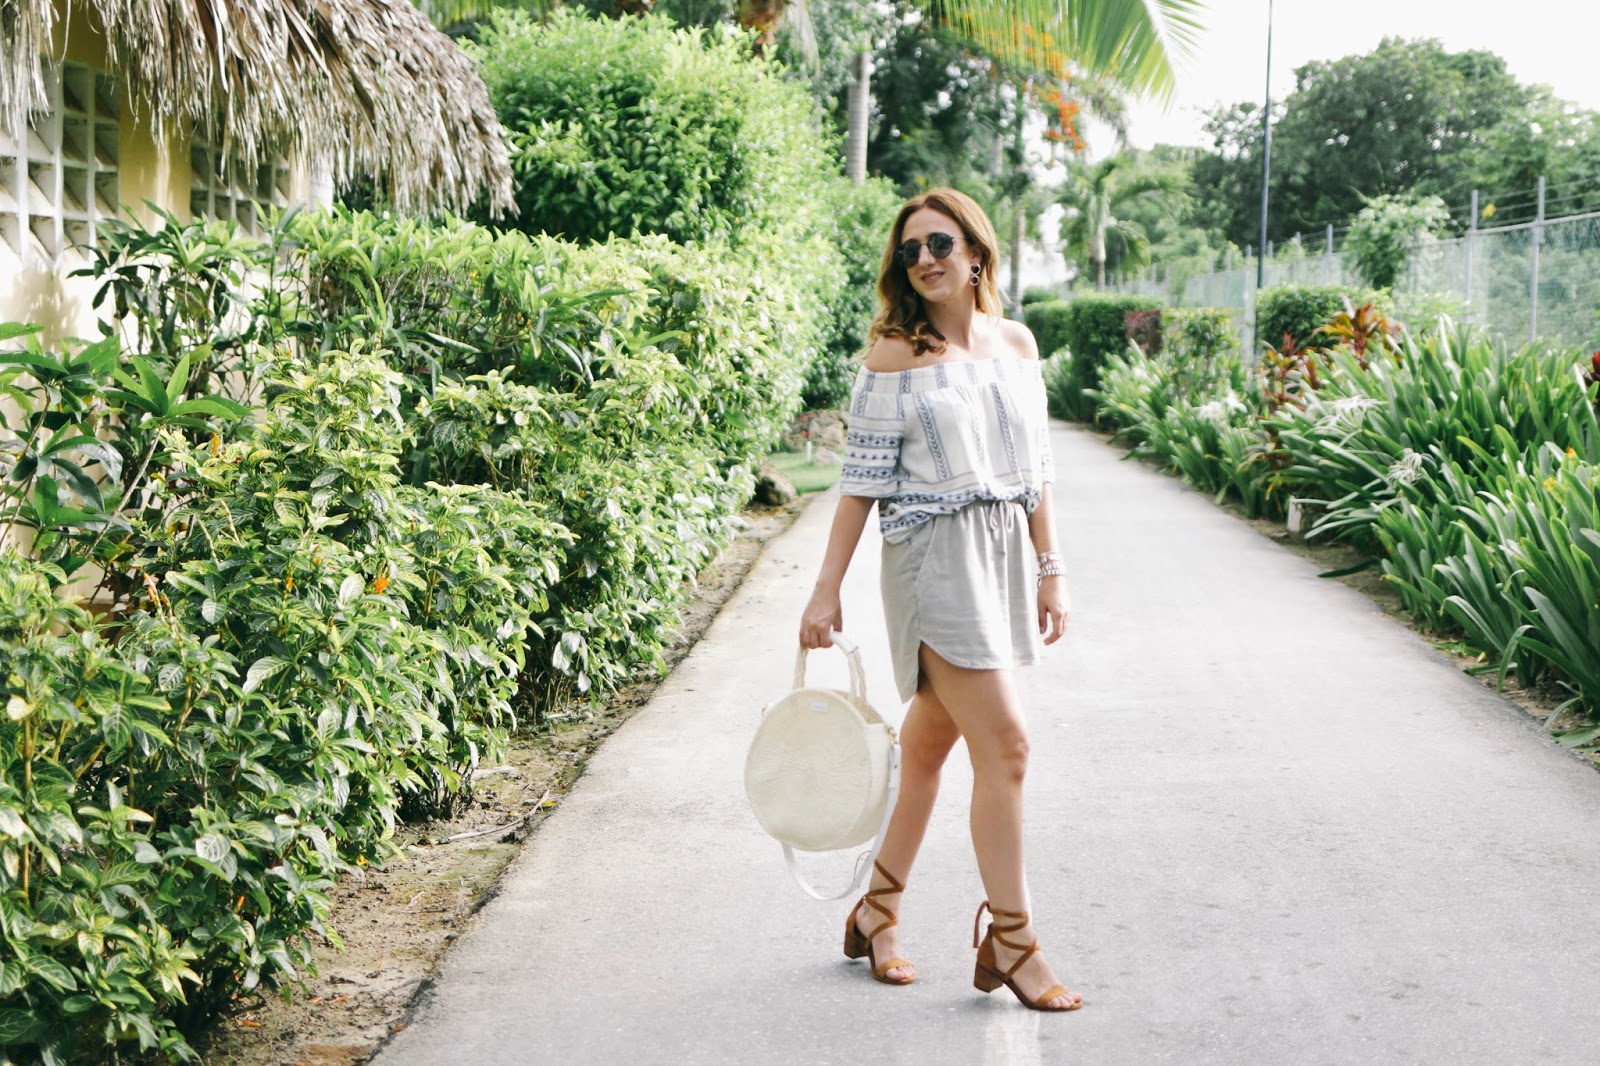 south moon under, outfit, travel style, travel outfit, punta cana, dominican republic, travel blogger, dreams resort, review, off the shoulder, lace up sandals, clare V bag, dc blog, blogger, style blog, fashion blog, inspo